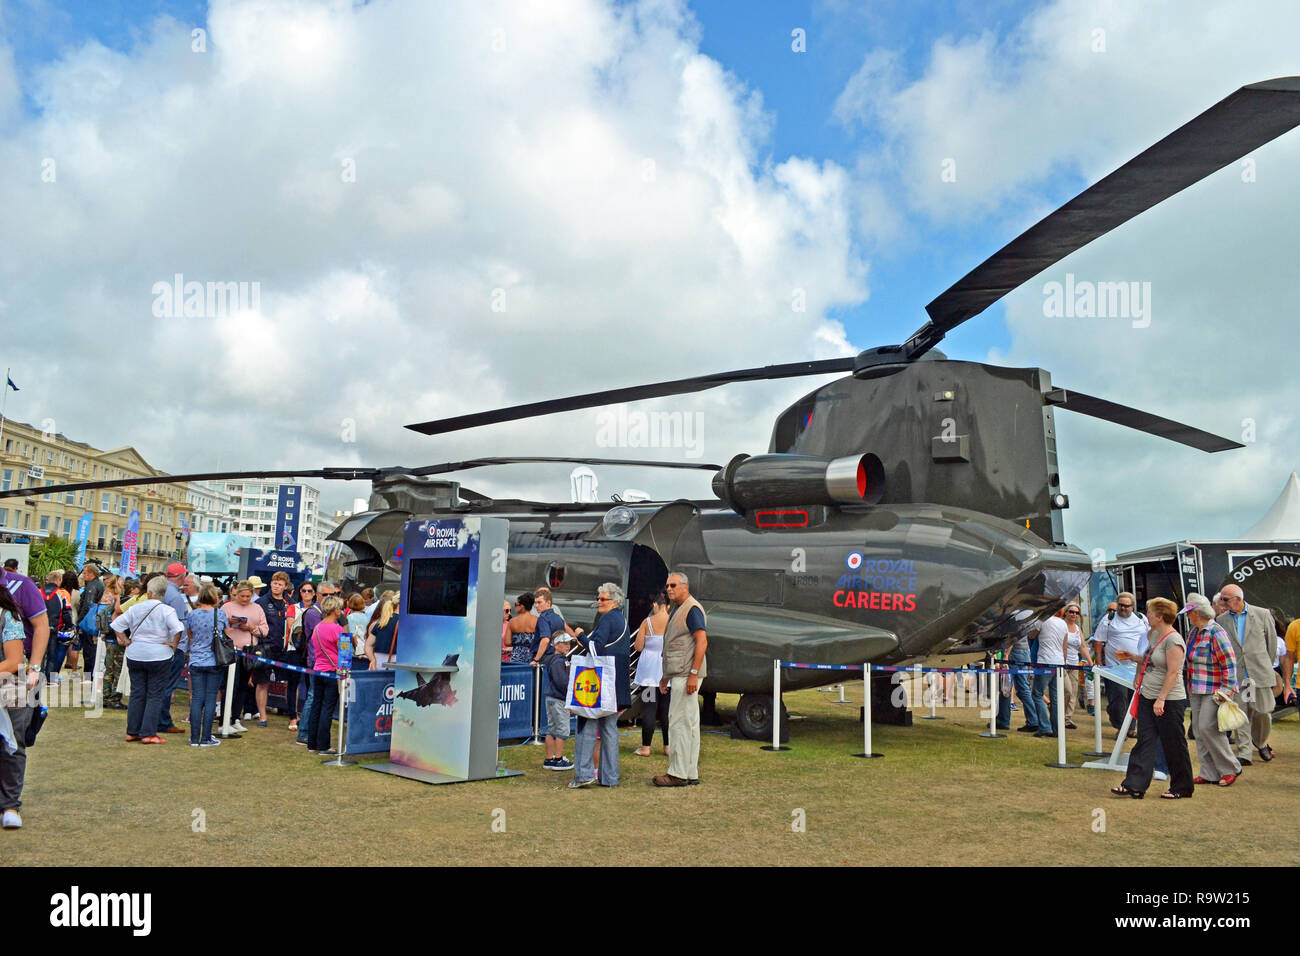 RAF Chinook, RAF Careers plane at Eastbourne Airbourne, Air Show, Eastbourne, East Sussex, UK Stock Photo